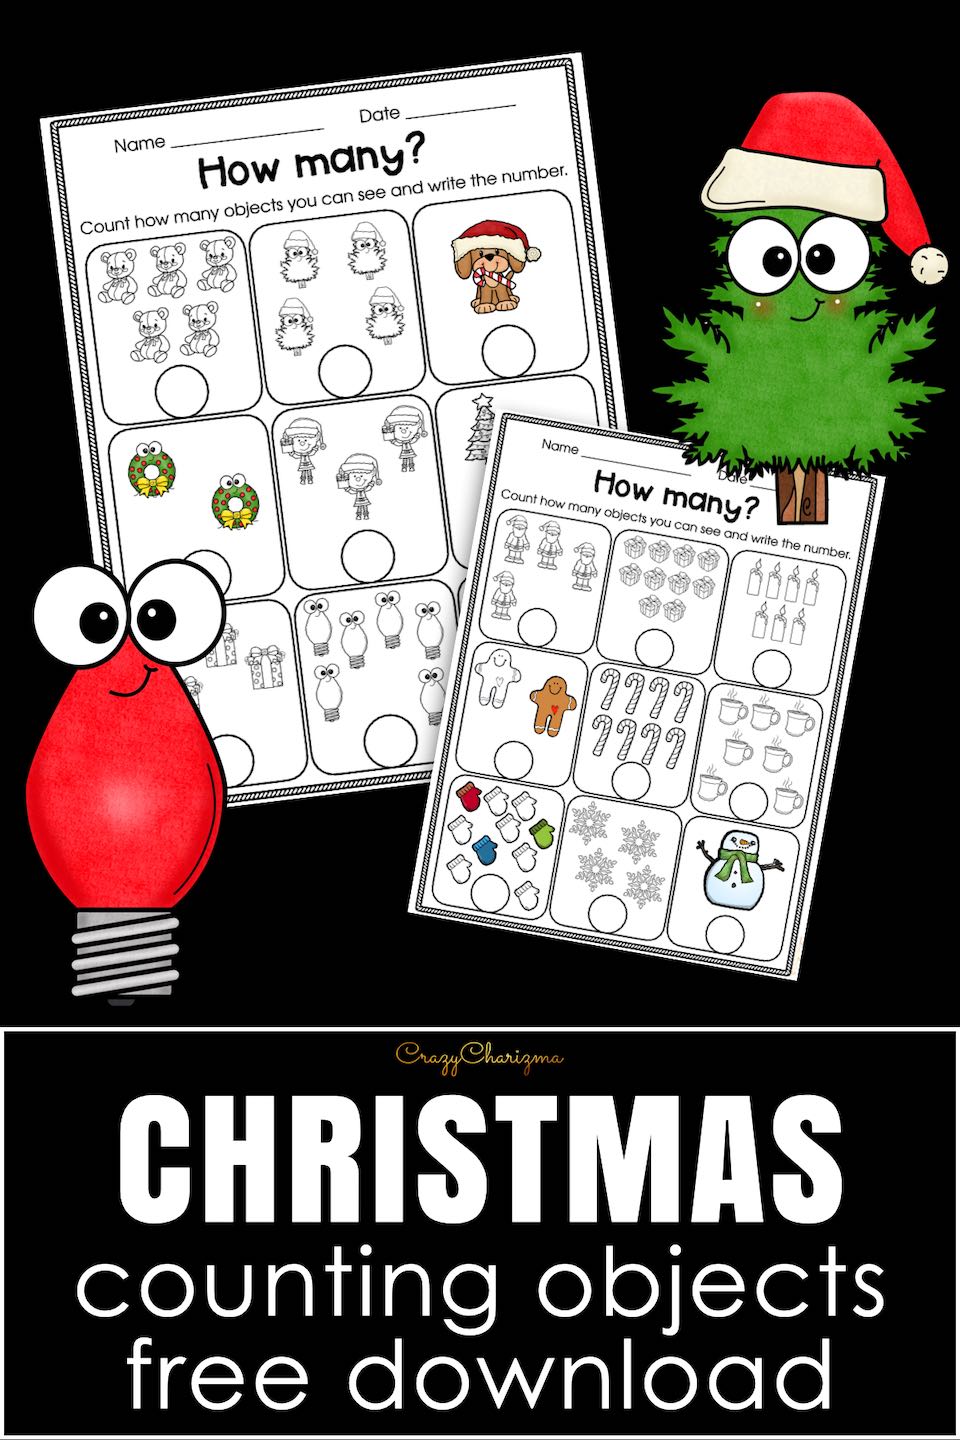 Christmas is coming and it's the ideal moment to merge holiday joy with learning. Searching for Christmas number activities for preschoolers? You're in luck! I've created a fantastic, free printable to make counting festive objects super fun for your kids.